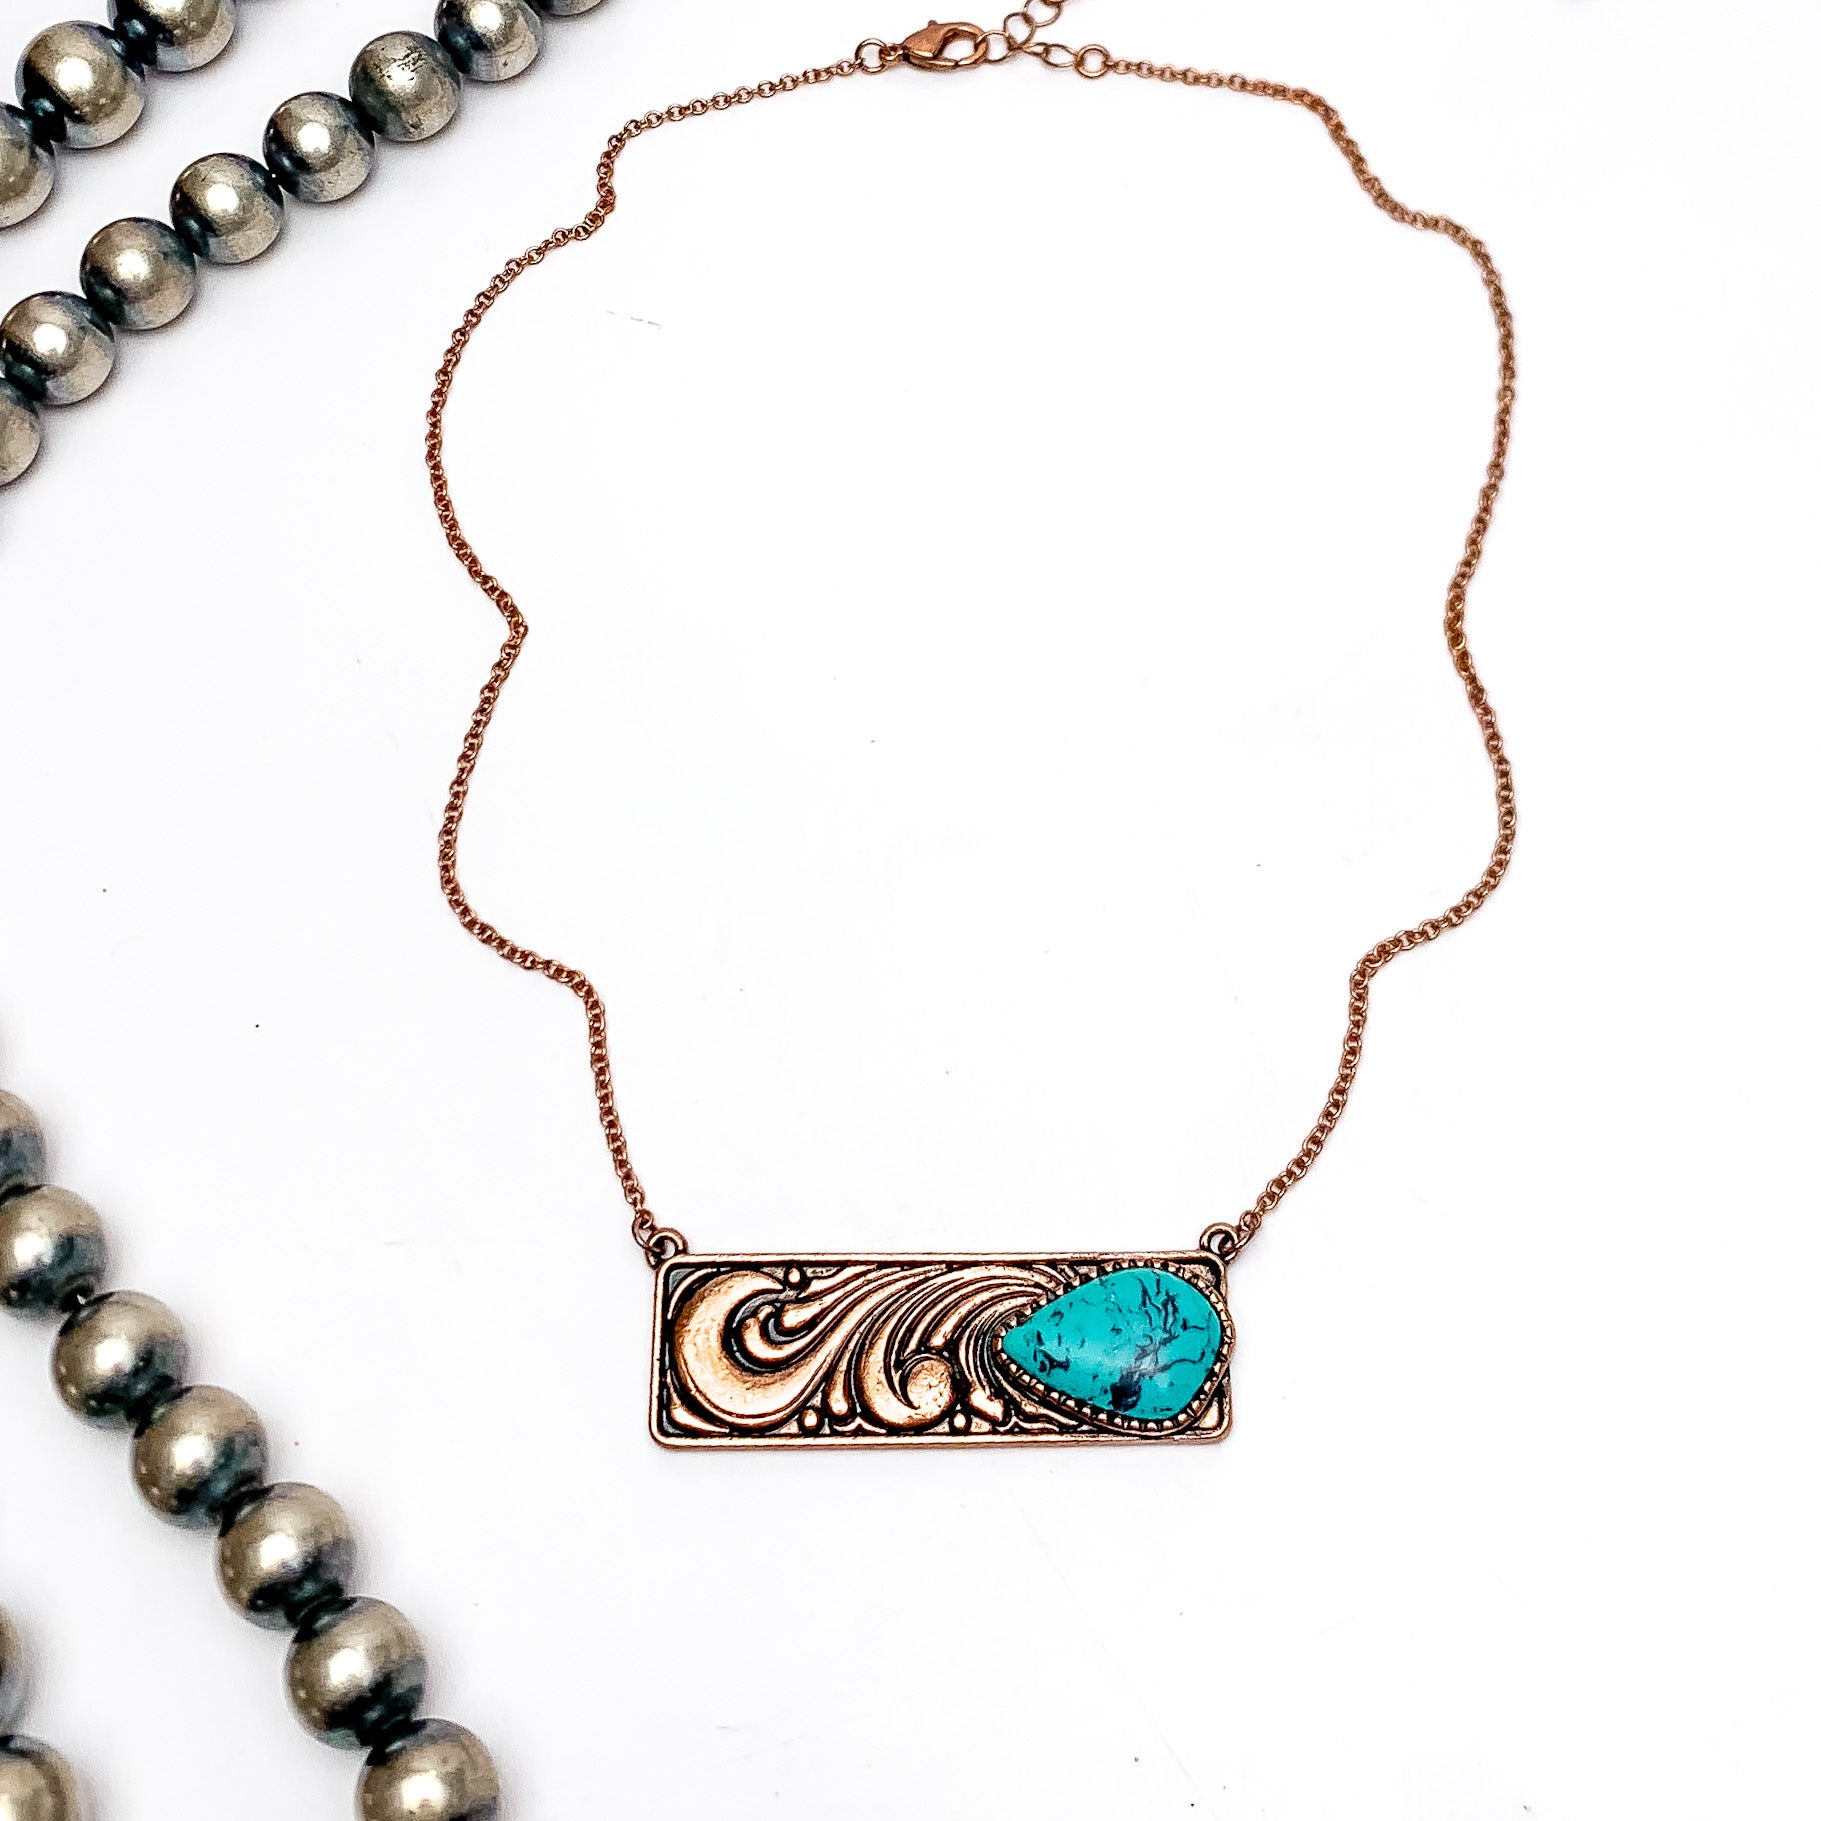 Western Swirl Copper Tone Necklace With Bar Pendent and Turquoise Stone. This necklace is pictured on a white background with Navajo pearls on the left side.